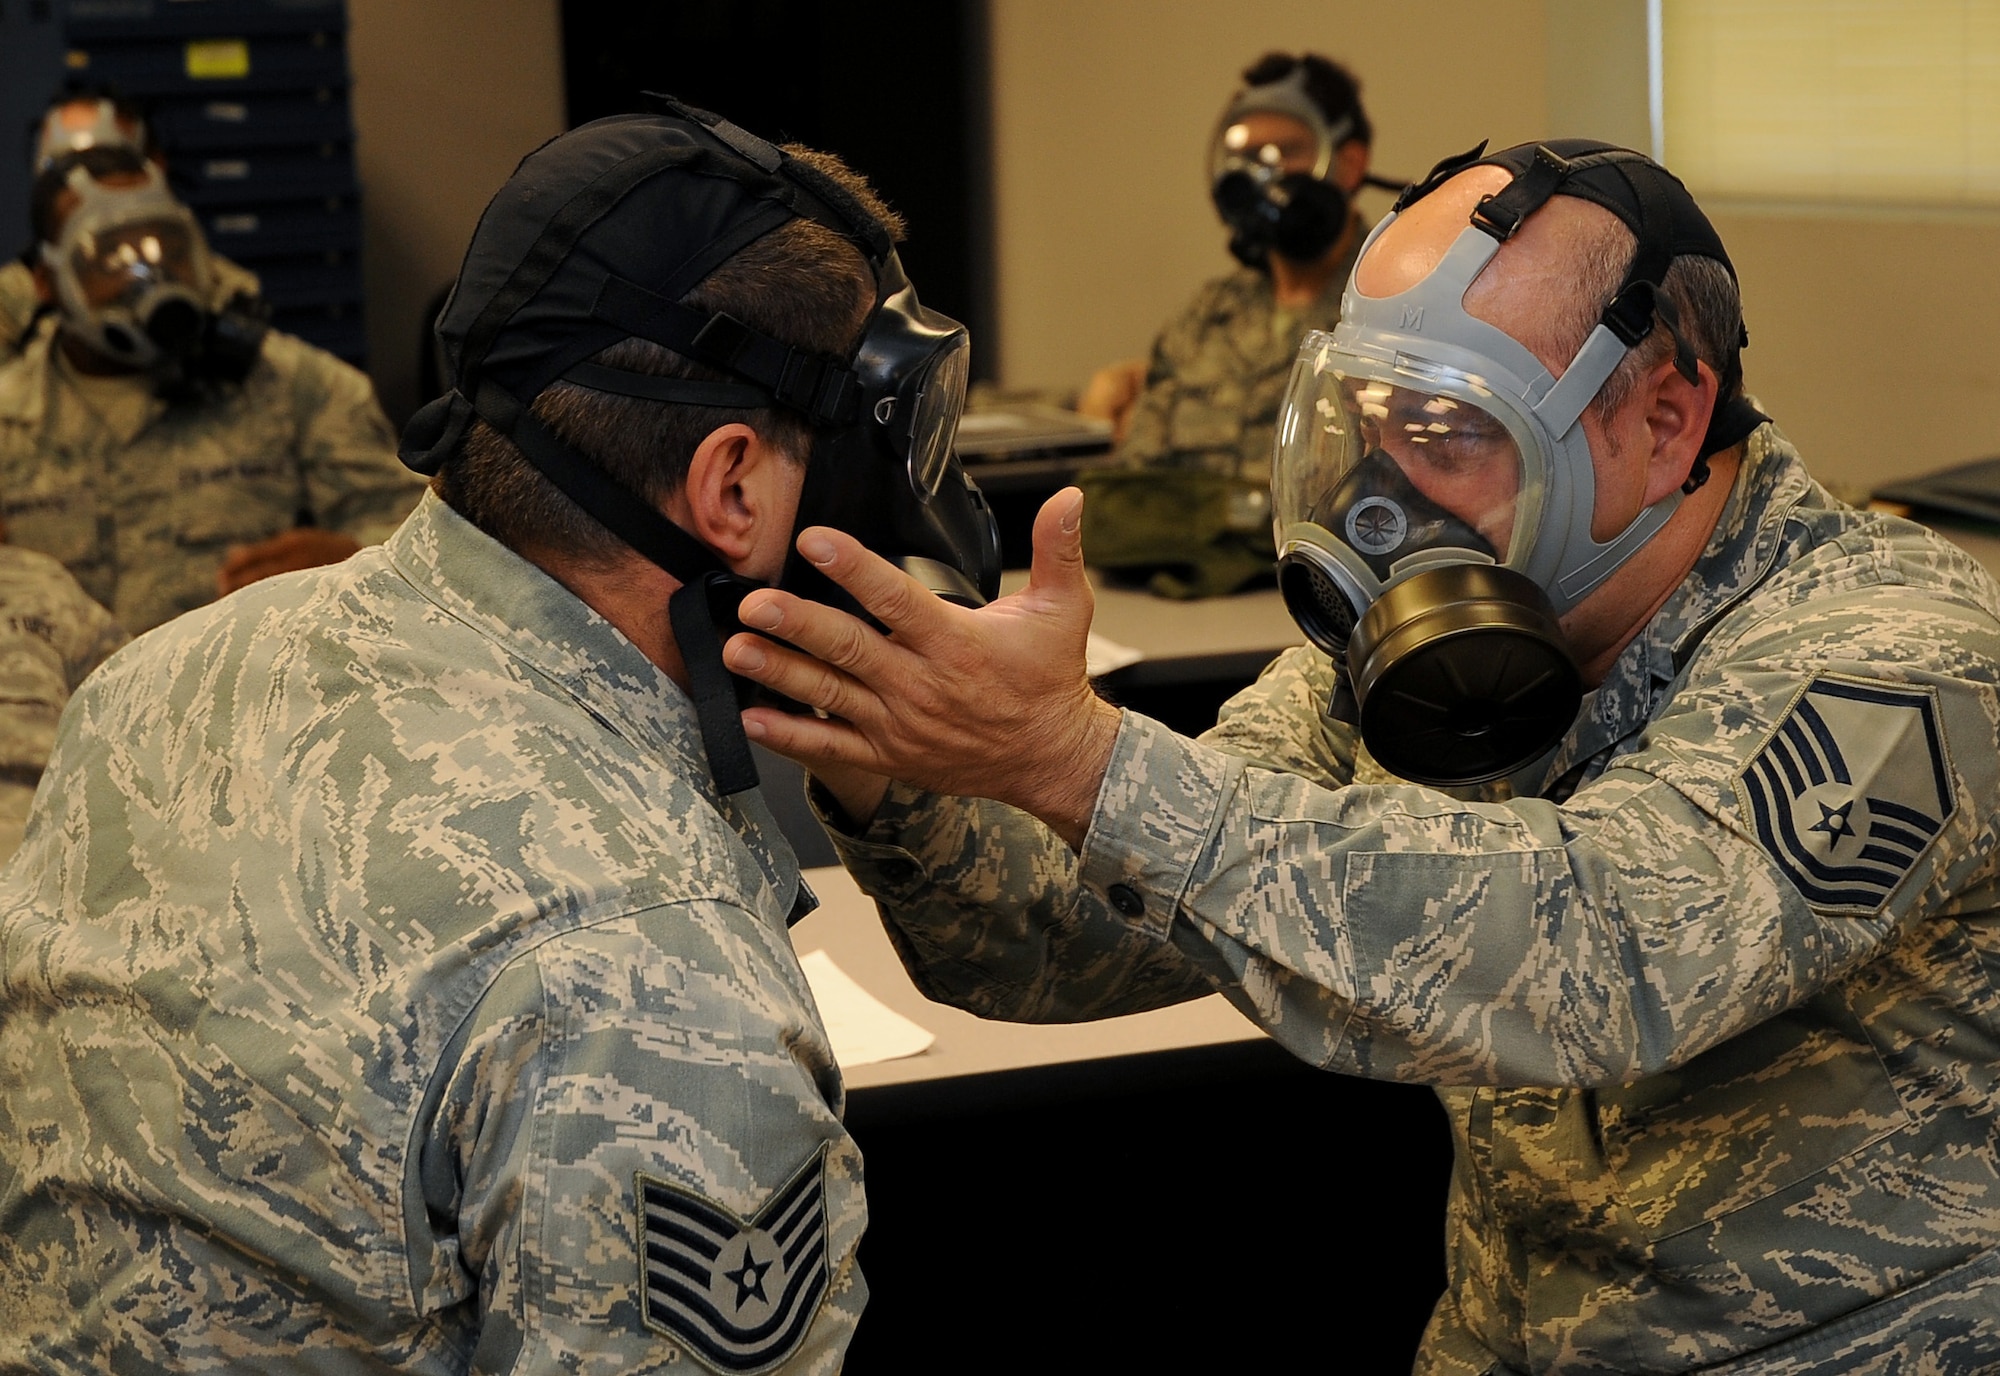 Richard Cunningham, 2nd Force Support Squadron, during a chemical, biological, radiological, nuclear and high-yield explosive class on Barksdale Air Force Base, La., Aug. 18. The 2nd Civil Engineer Squadron Emergency Management flight teaches the CBRNE class several times a month to keep Barksdale Airmen up to date with training requirements. (U.S. Air Force photo/Senior Airman Amber Ashcraft) (RELEASED)